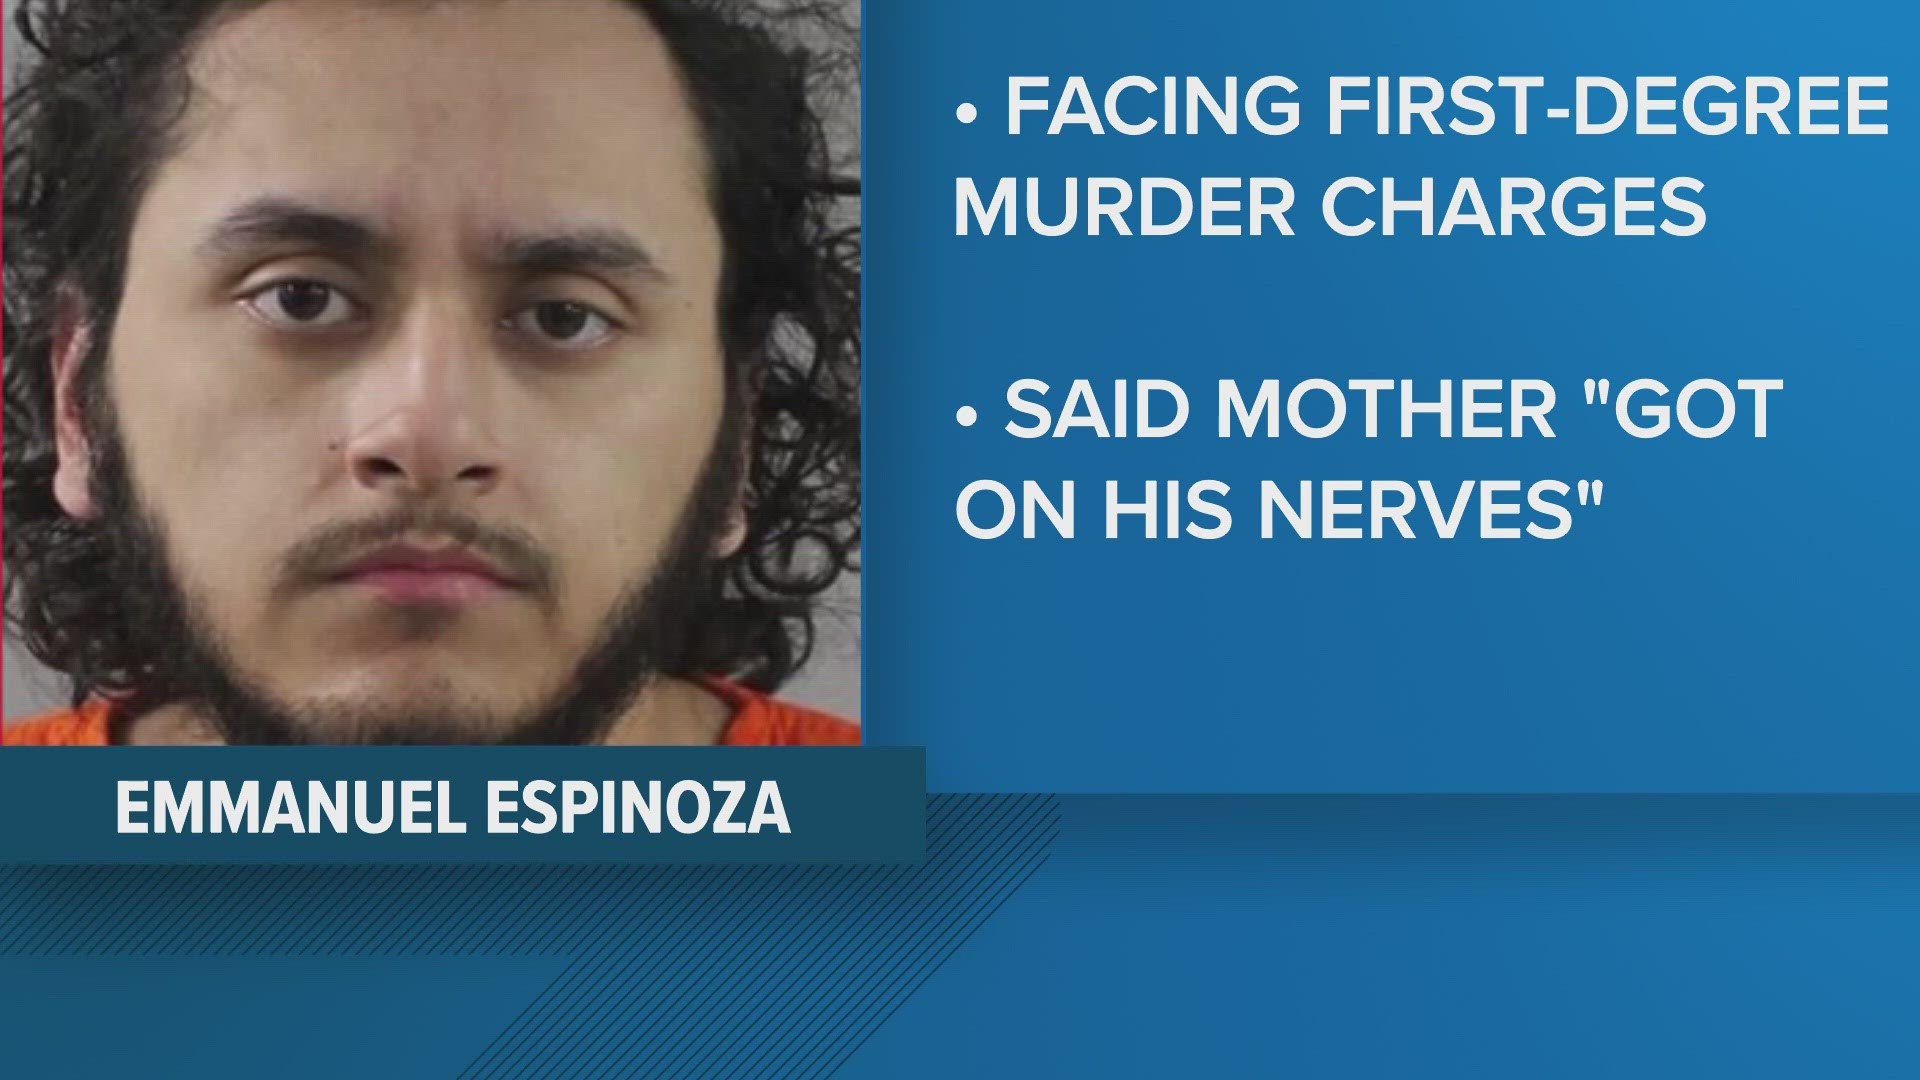 Suspect said he wanted to kill his mom for several years because she irritated him.